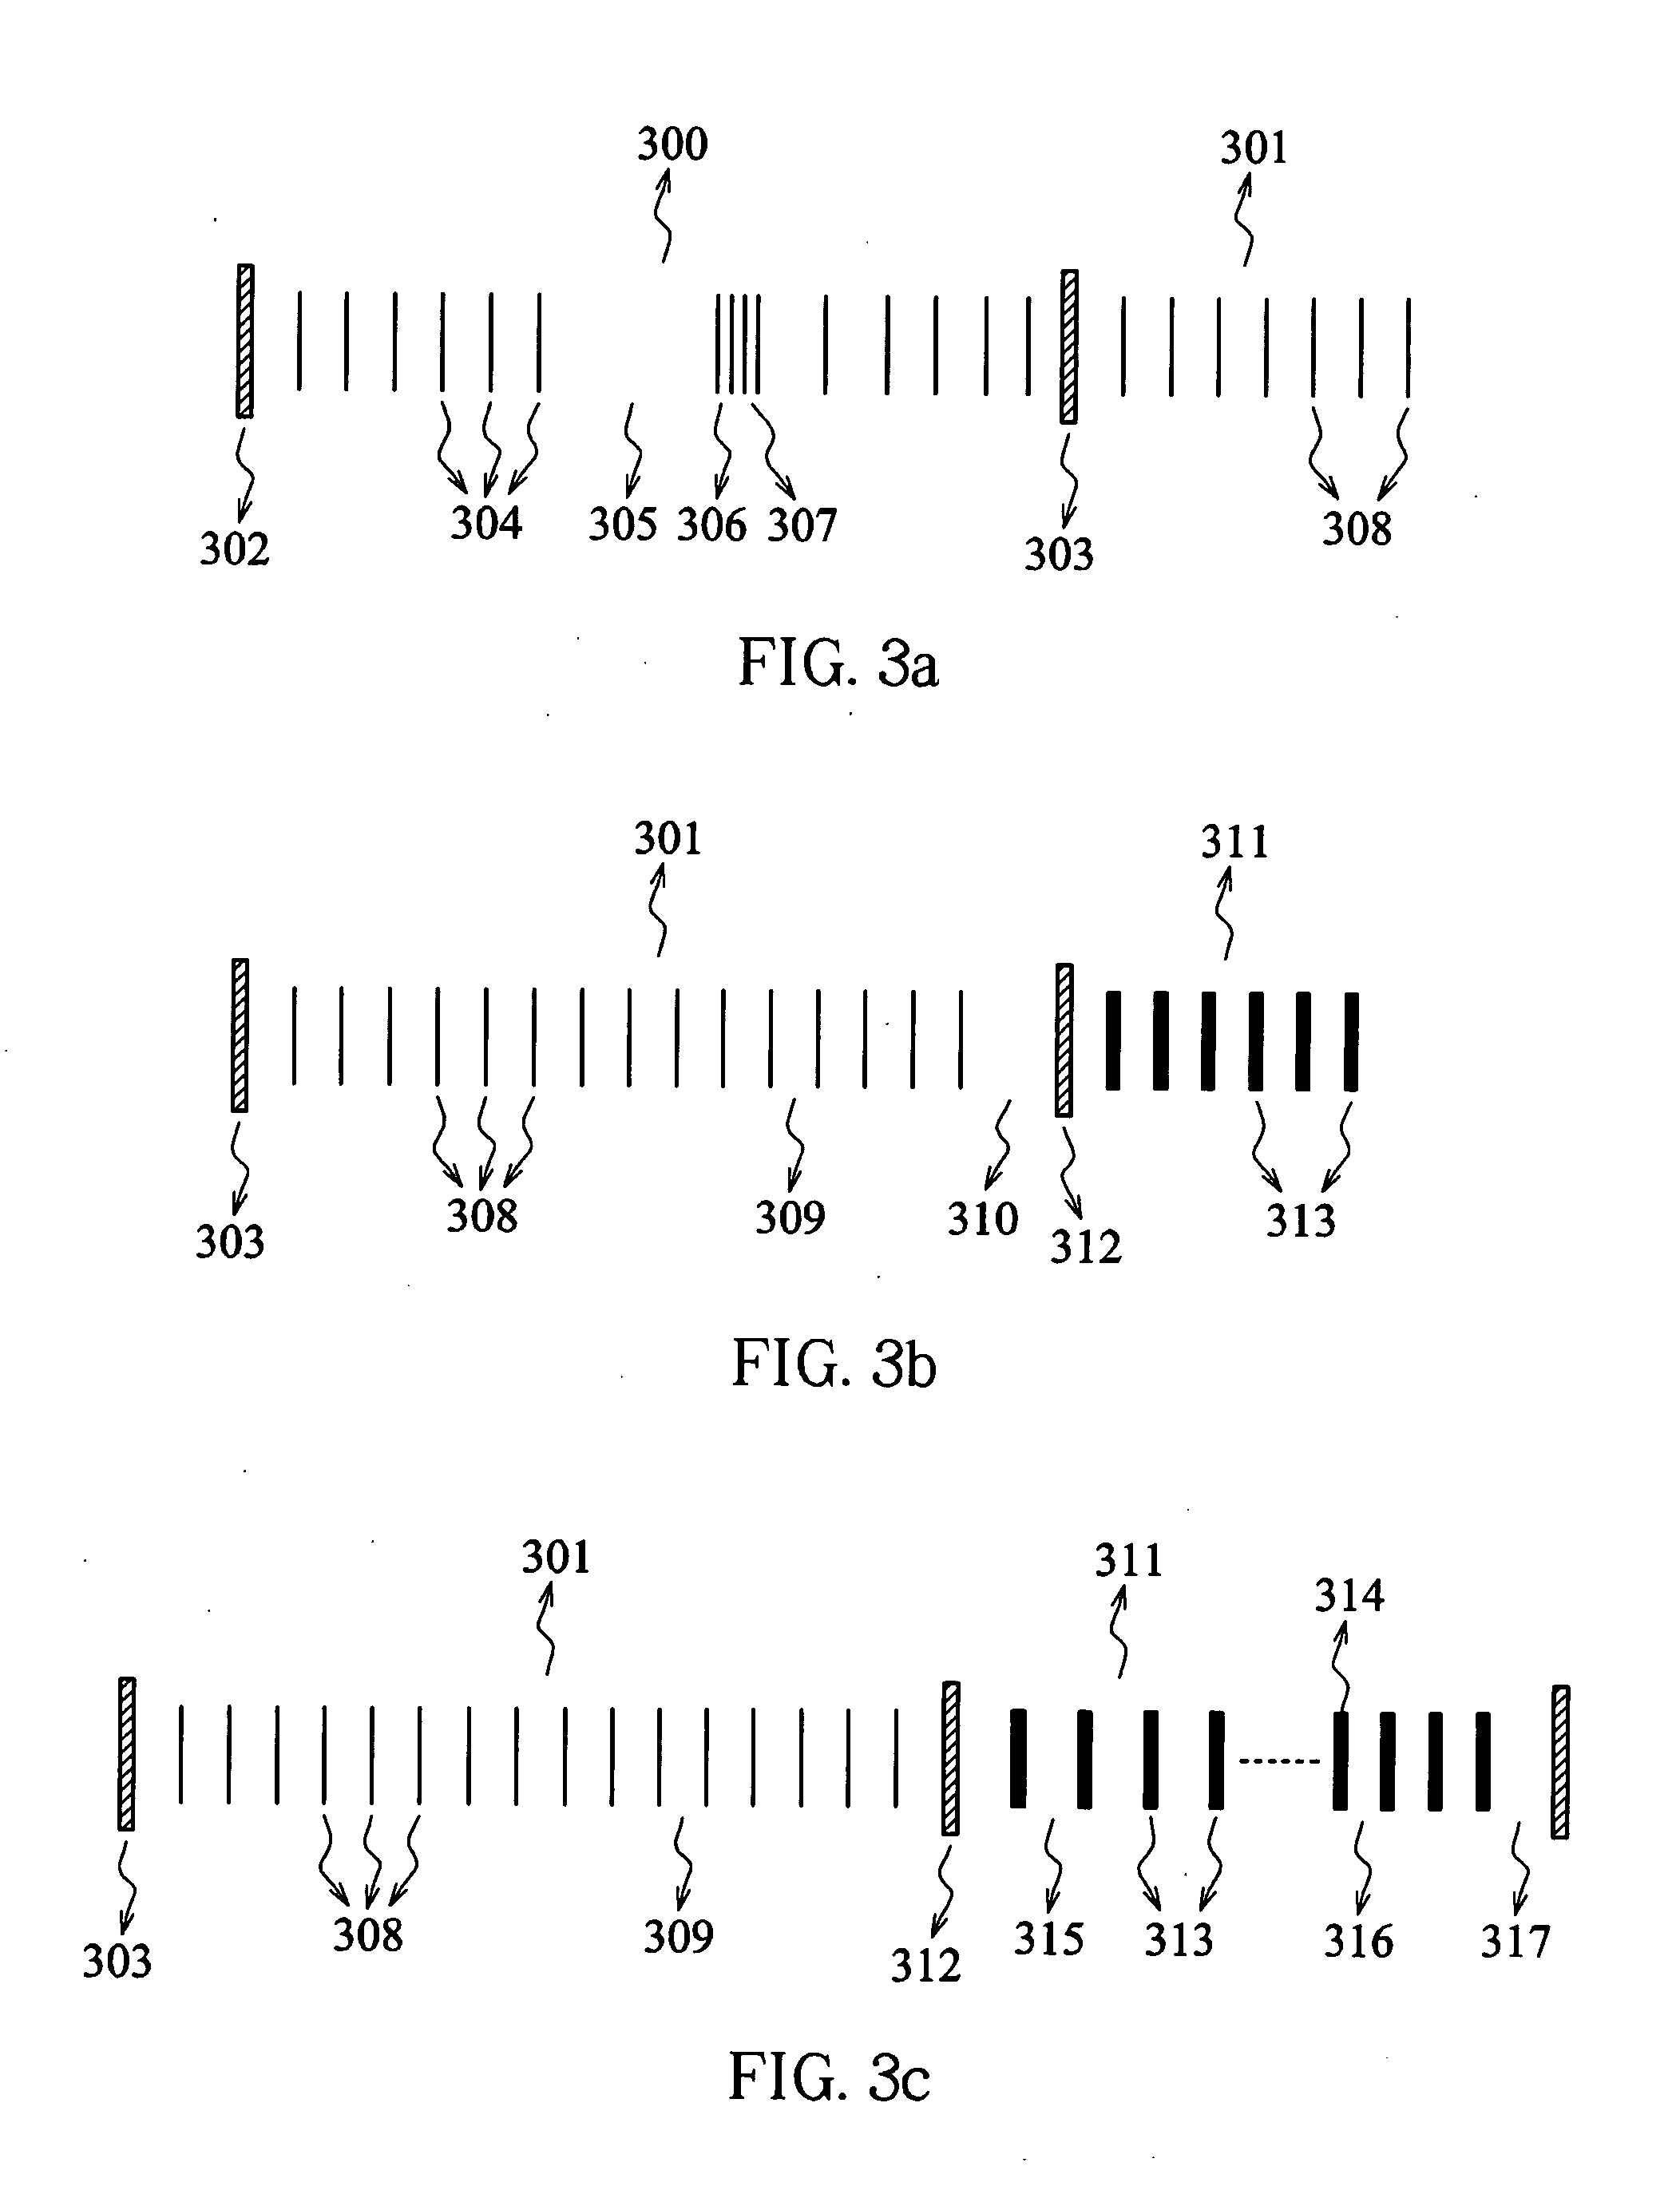 Method and system for improving video/audio data display fluency